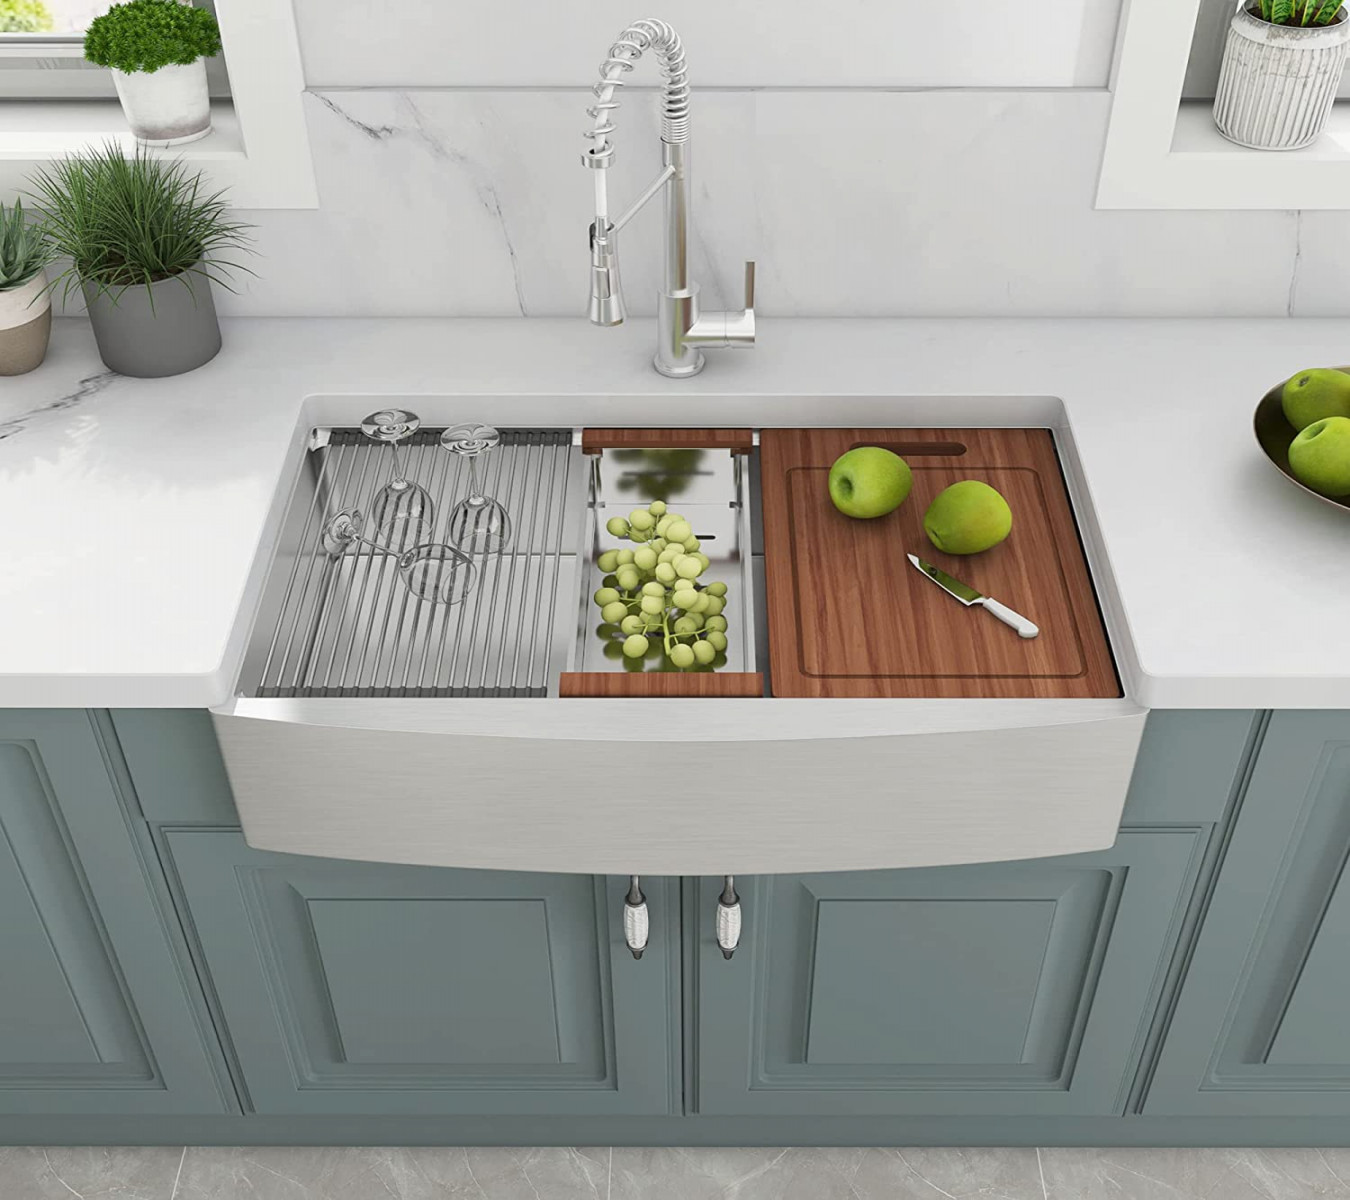 Hercate  Farmhouse Sink " x " Stainless Steel Workstation